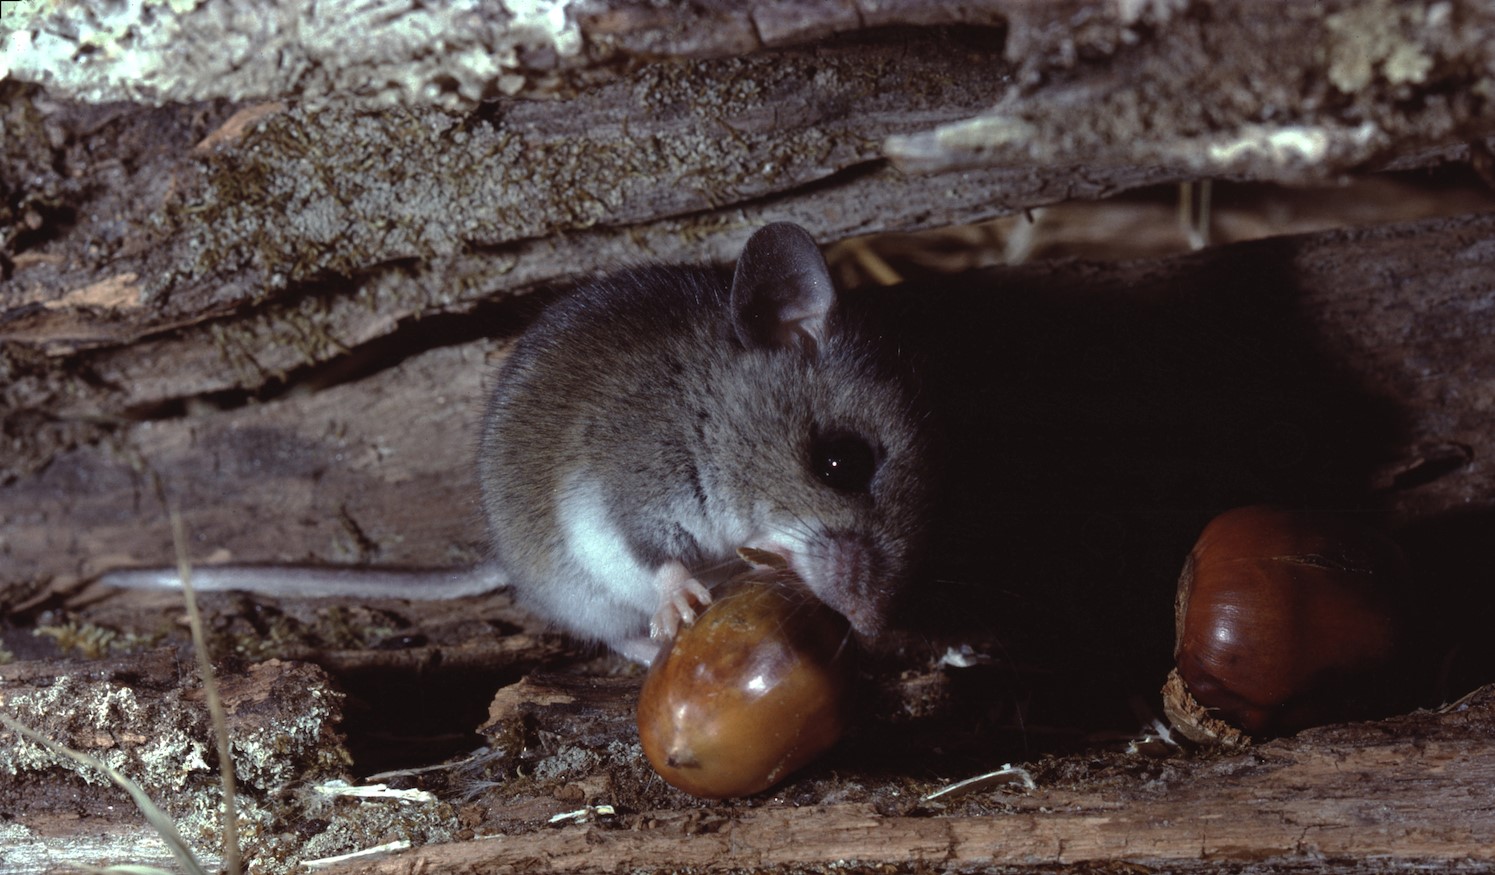 A white-footed mouse eating a nut.